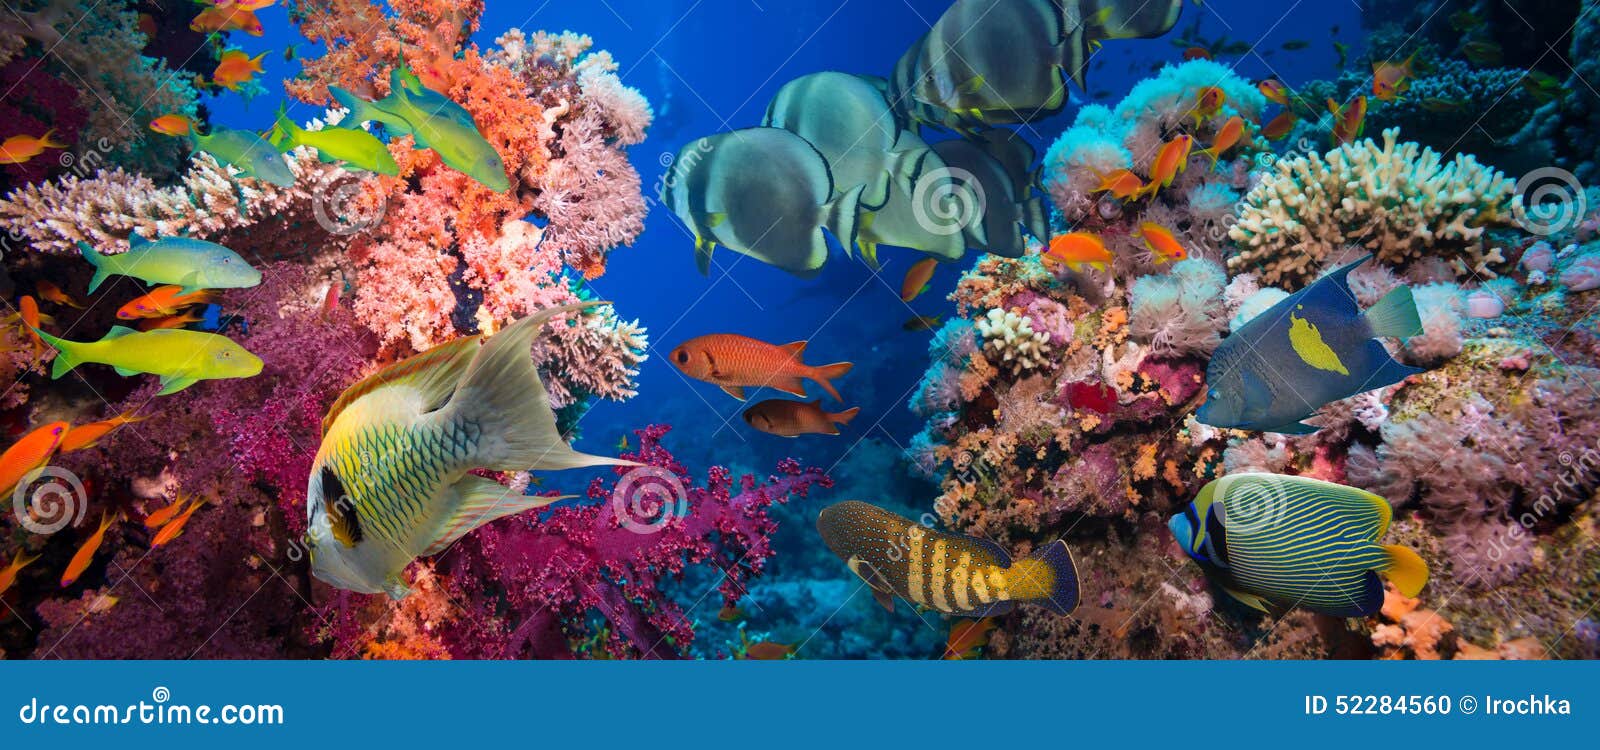 tropical fish and coral reef